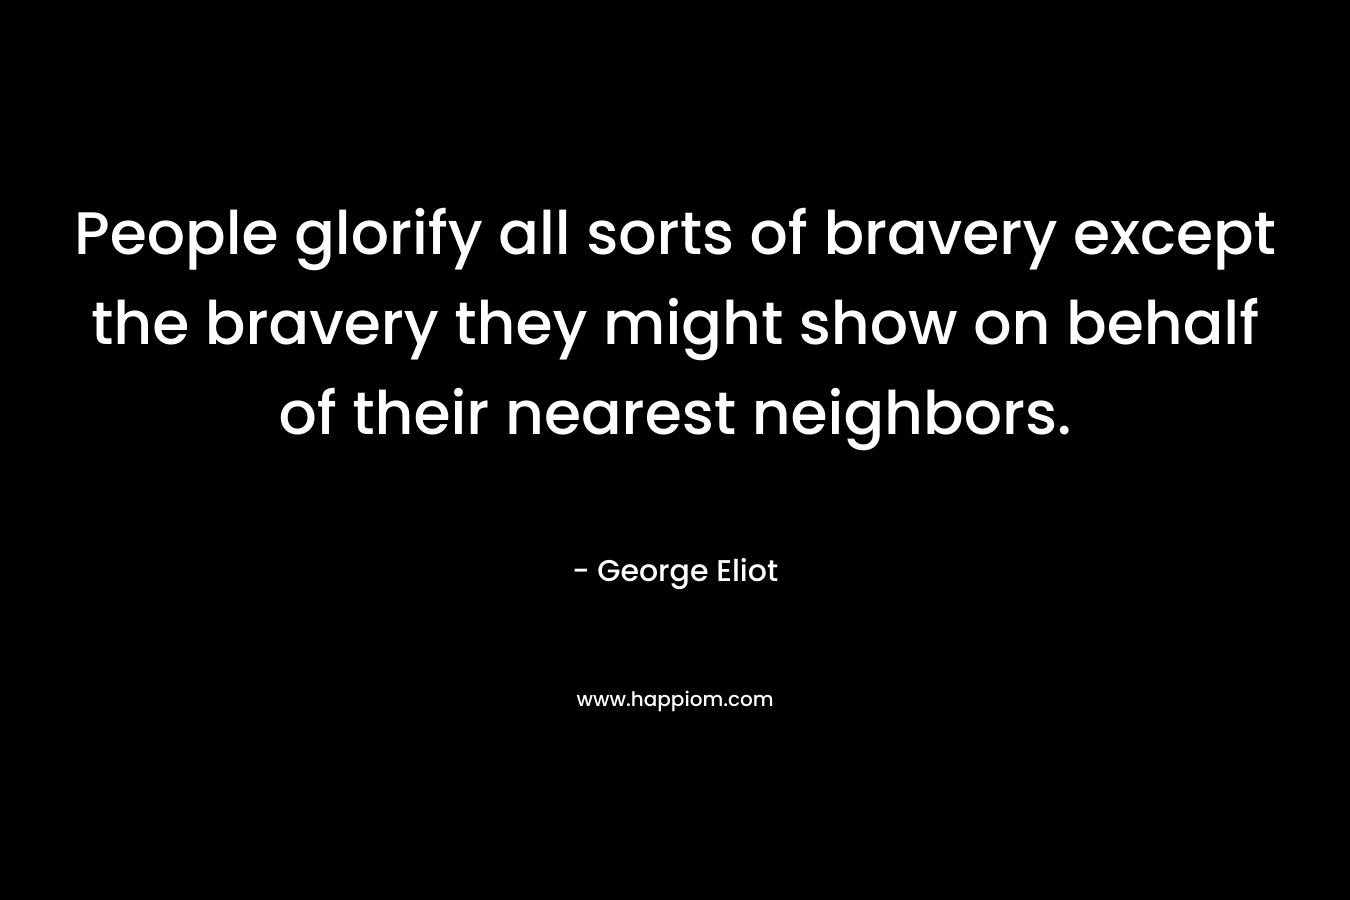 People glorify all sorts of bravery except the bravery they might show on behalf of their nearest neighbors. – George Eliot